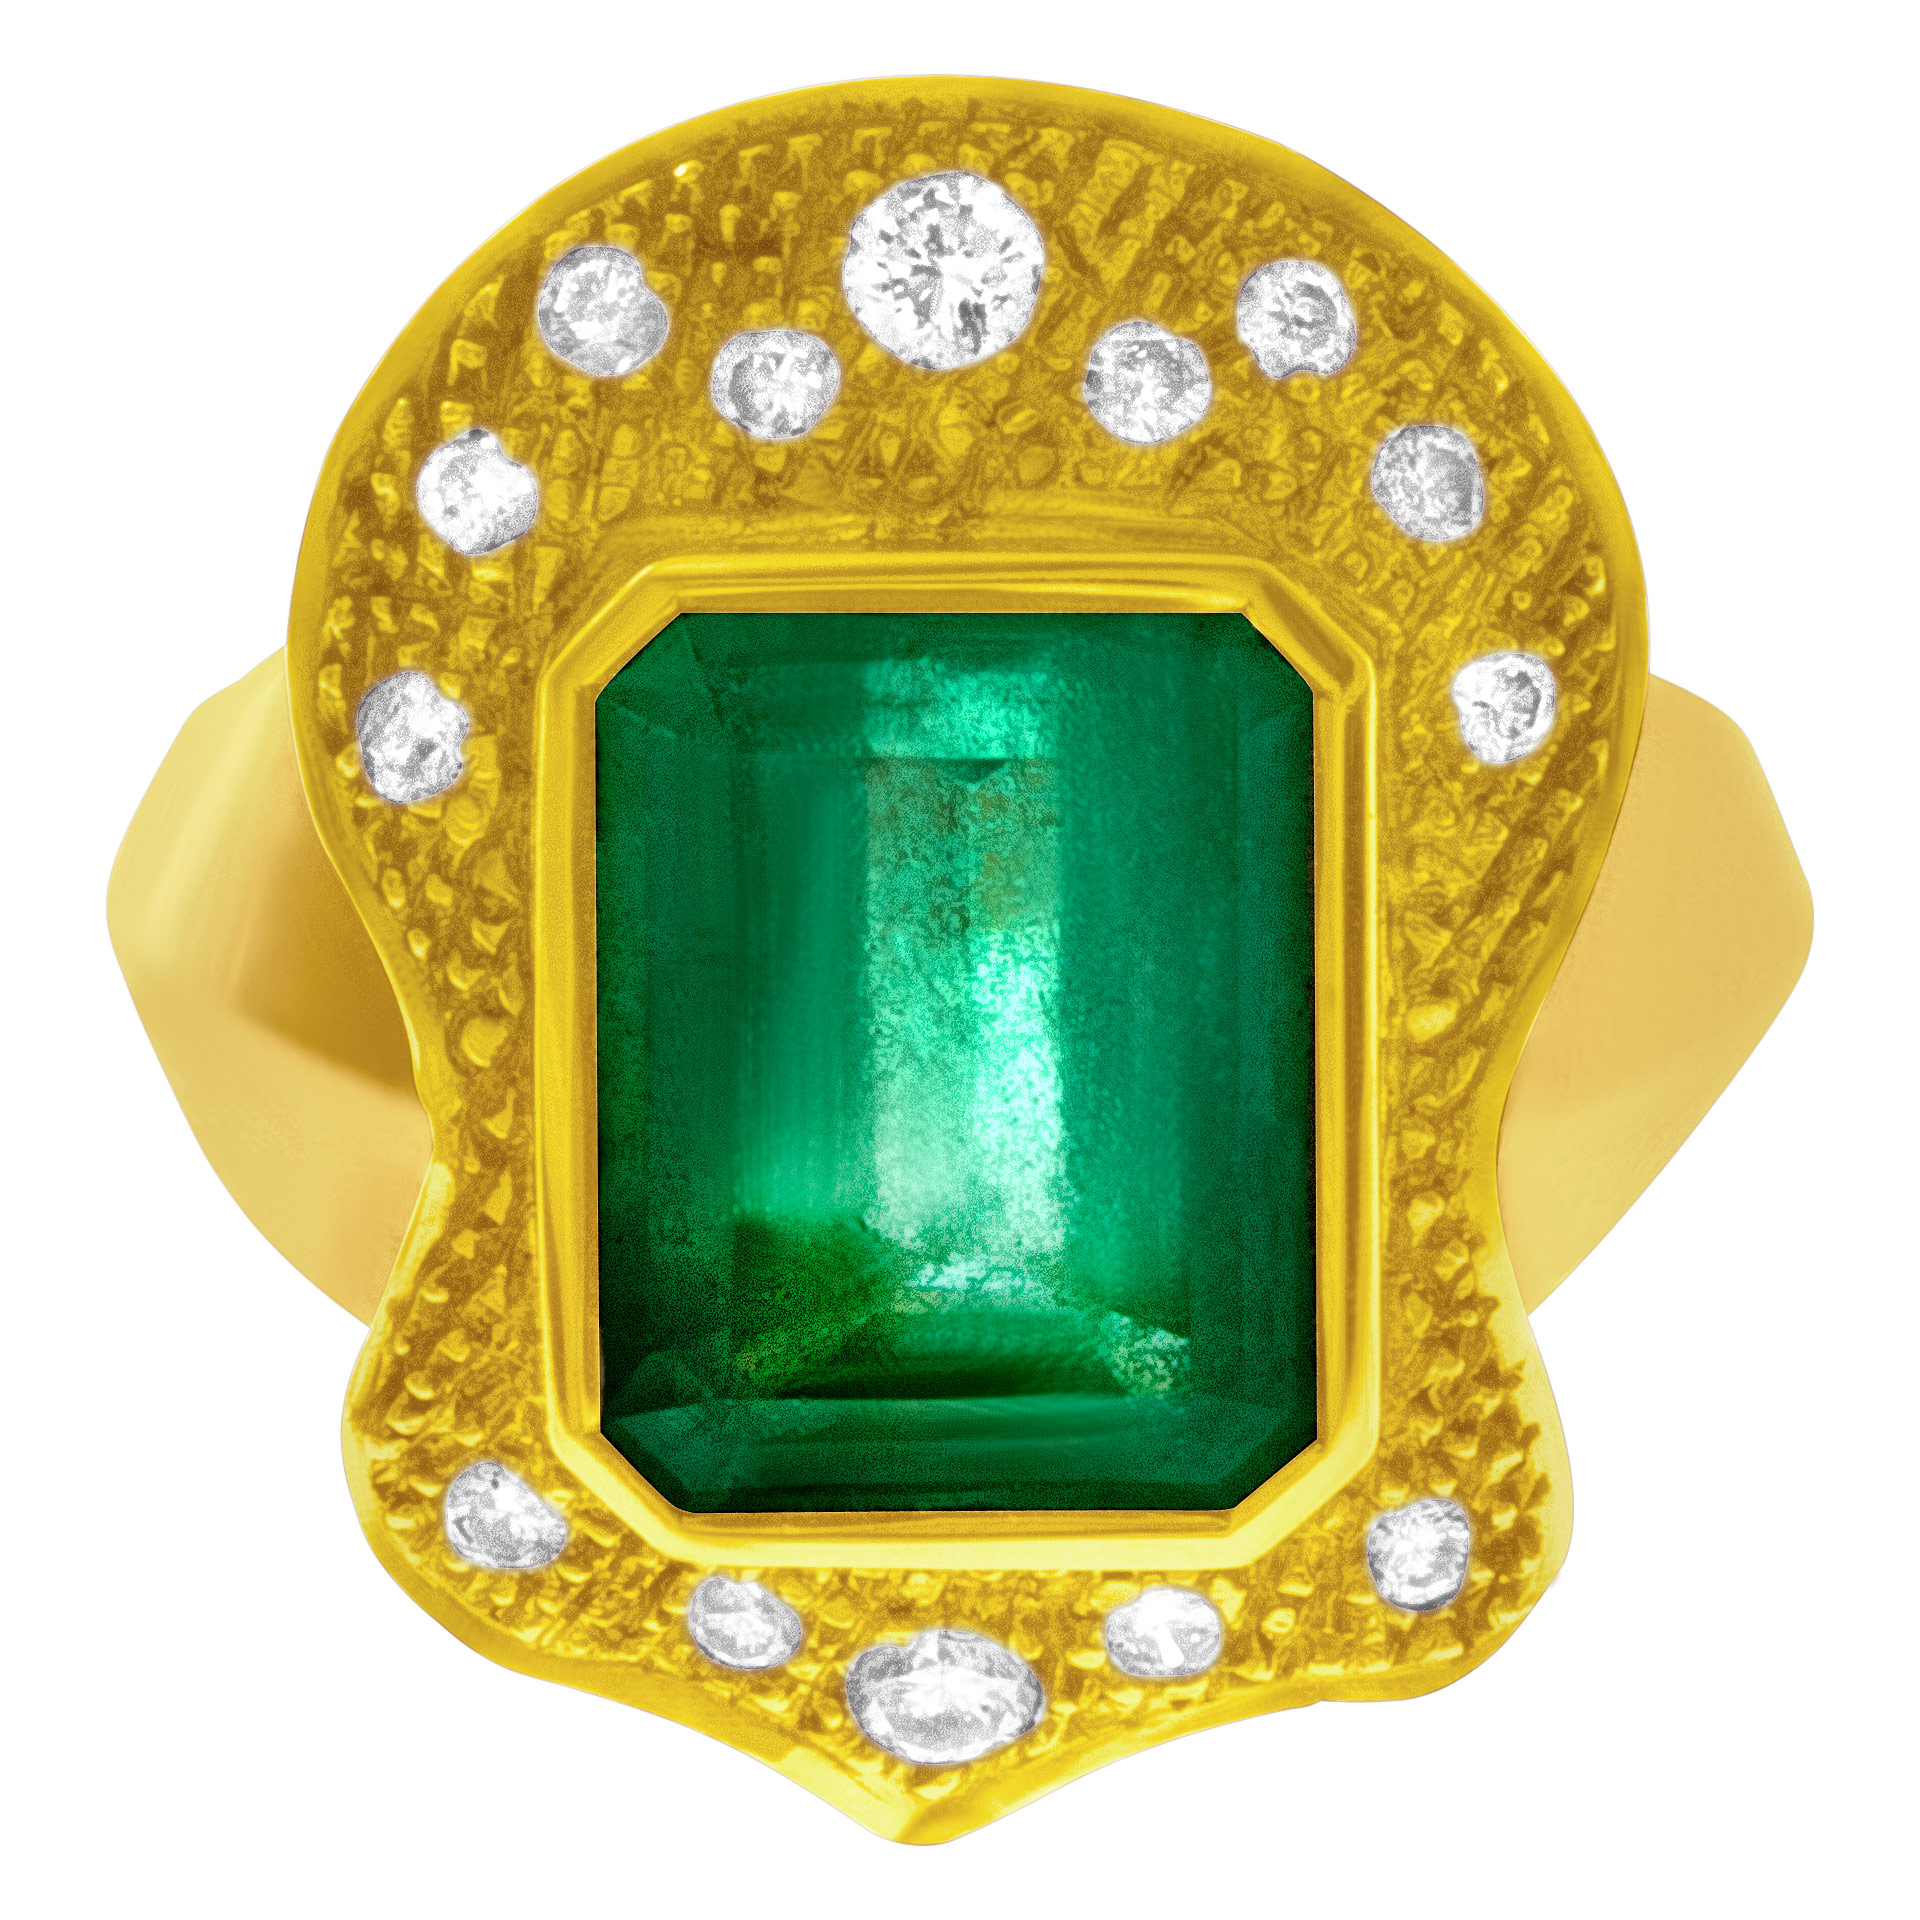 Emerald ring with diamond accents in 18k. 4.00 carat emerald. Size 8 image 1